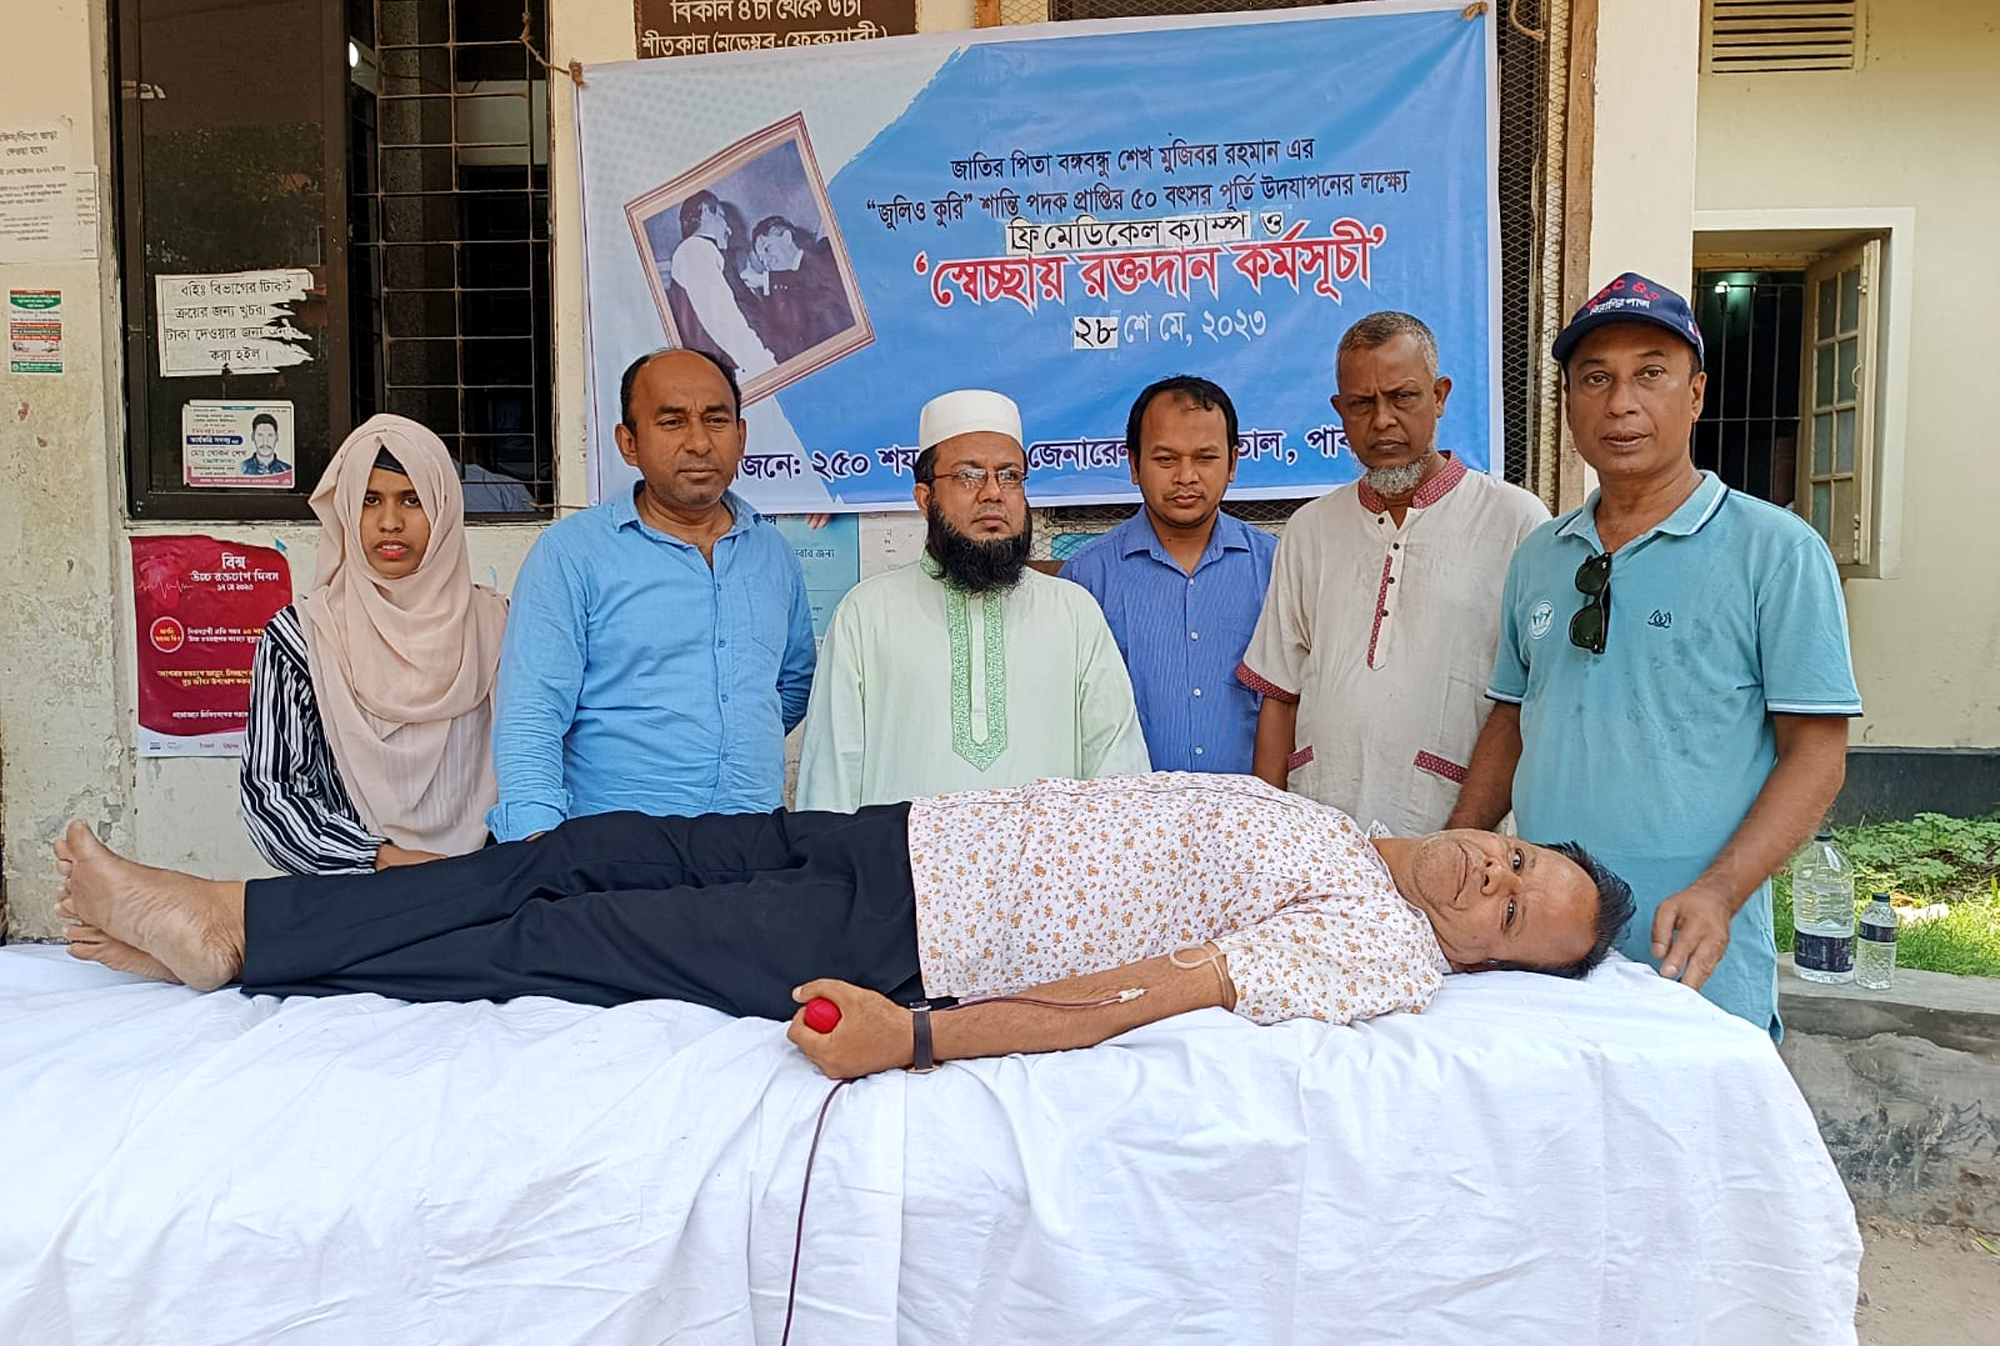 World Blood Donor Day: Many Lives Saved by Blood Donors - Local heroes in Pabna, including Shifat Rahman Sanam, Asaduzzaman Khokon, and Khairuzzaman Ahmed Arun, have selflessly donated blood numerous times, exemplifying compassion and humanity. Photo: Voice7 News